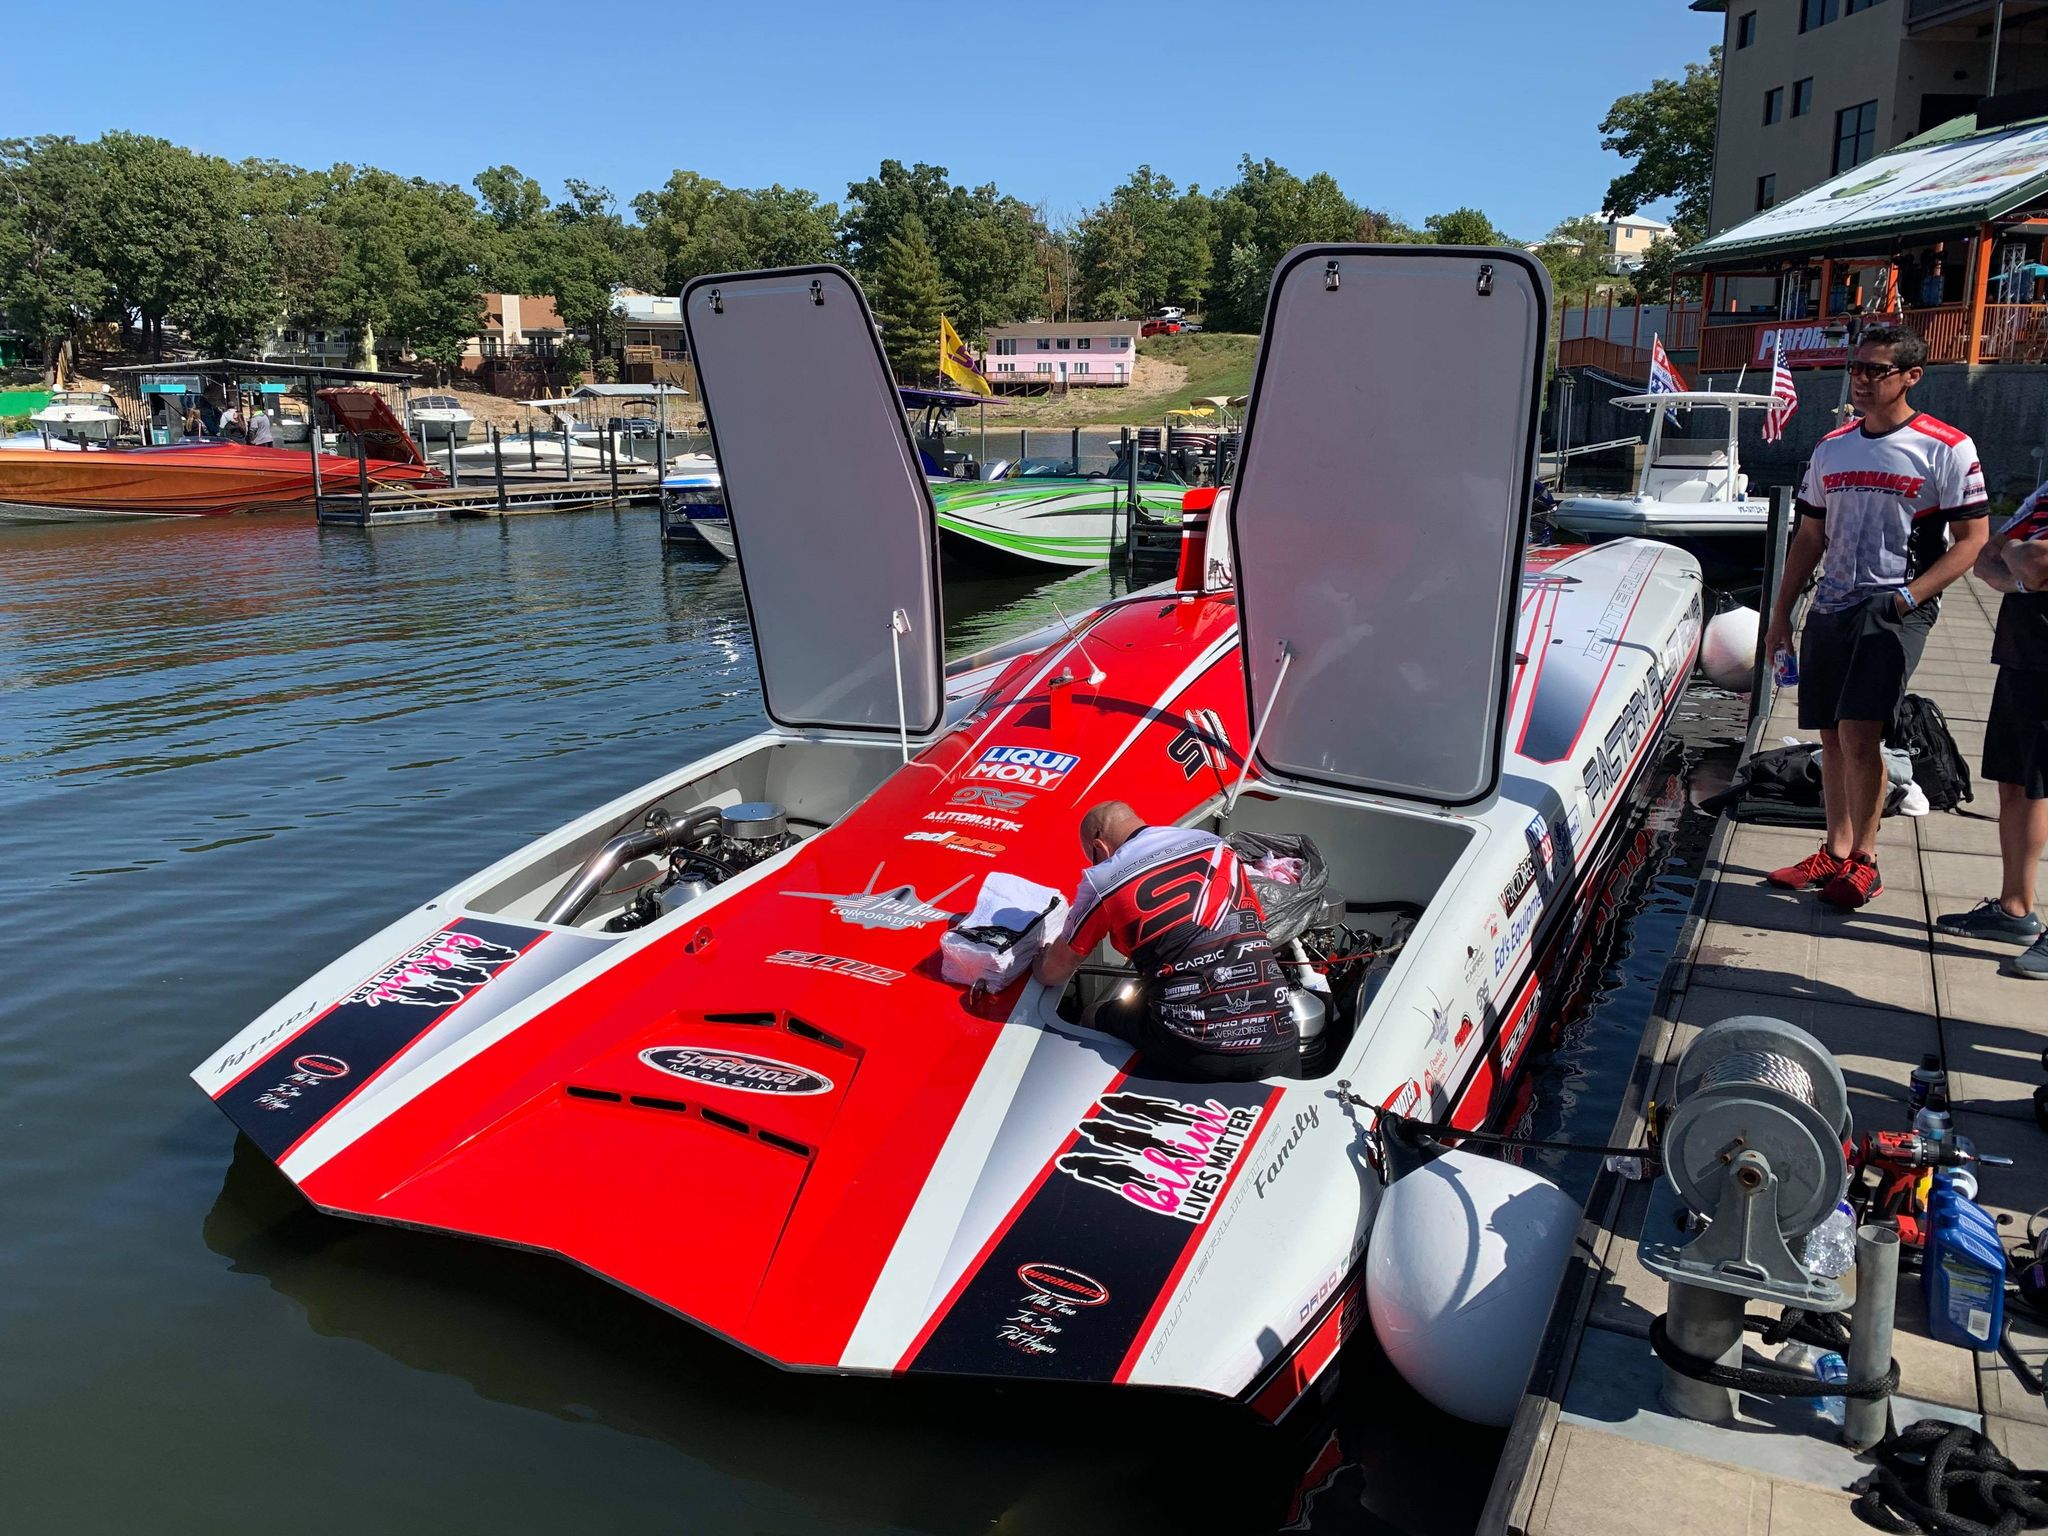 The 2020 Offshore race at Lake of the Ozarks Outboard Racing